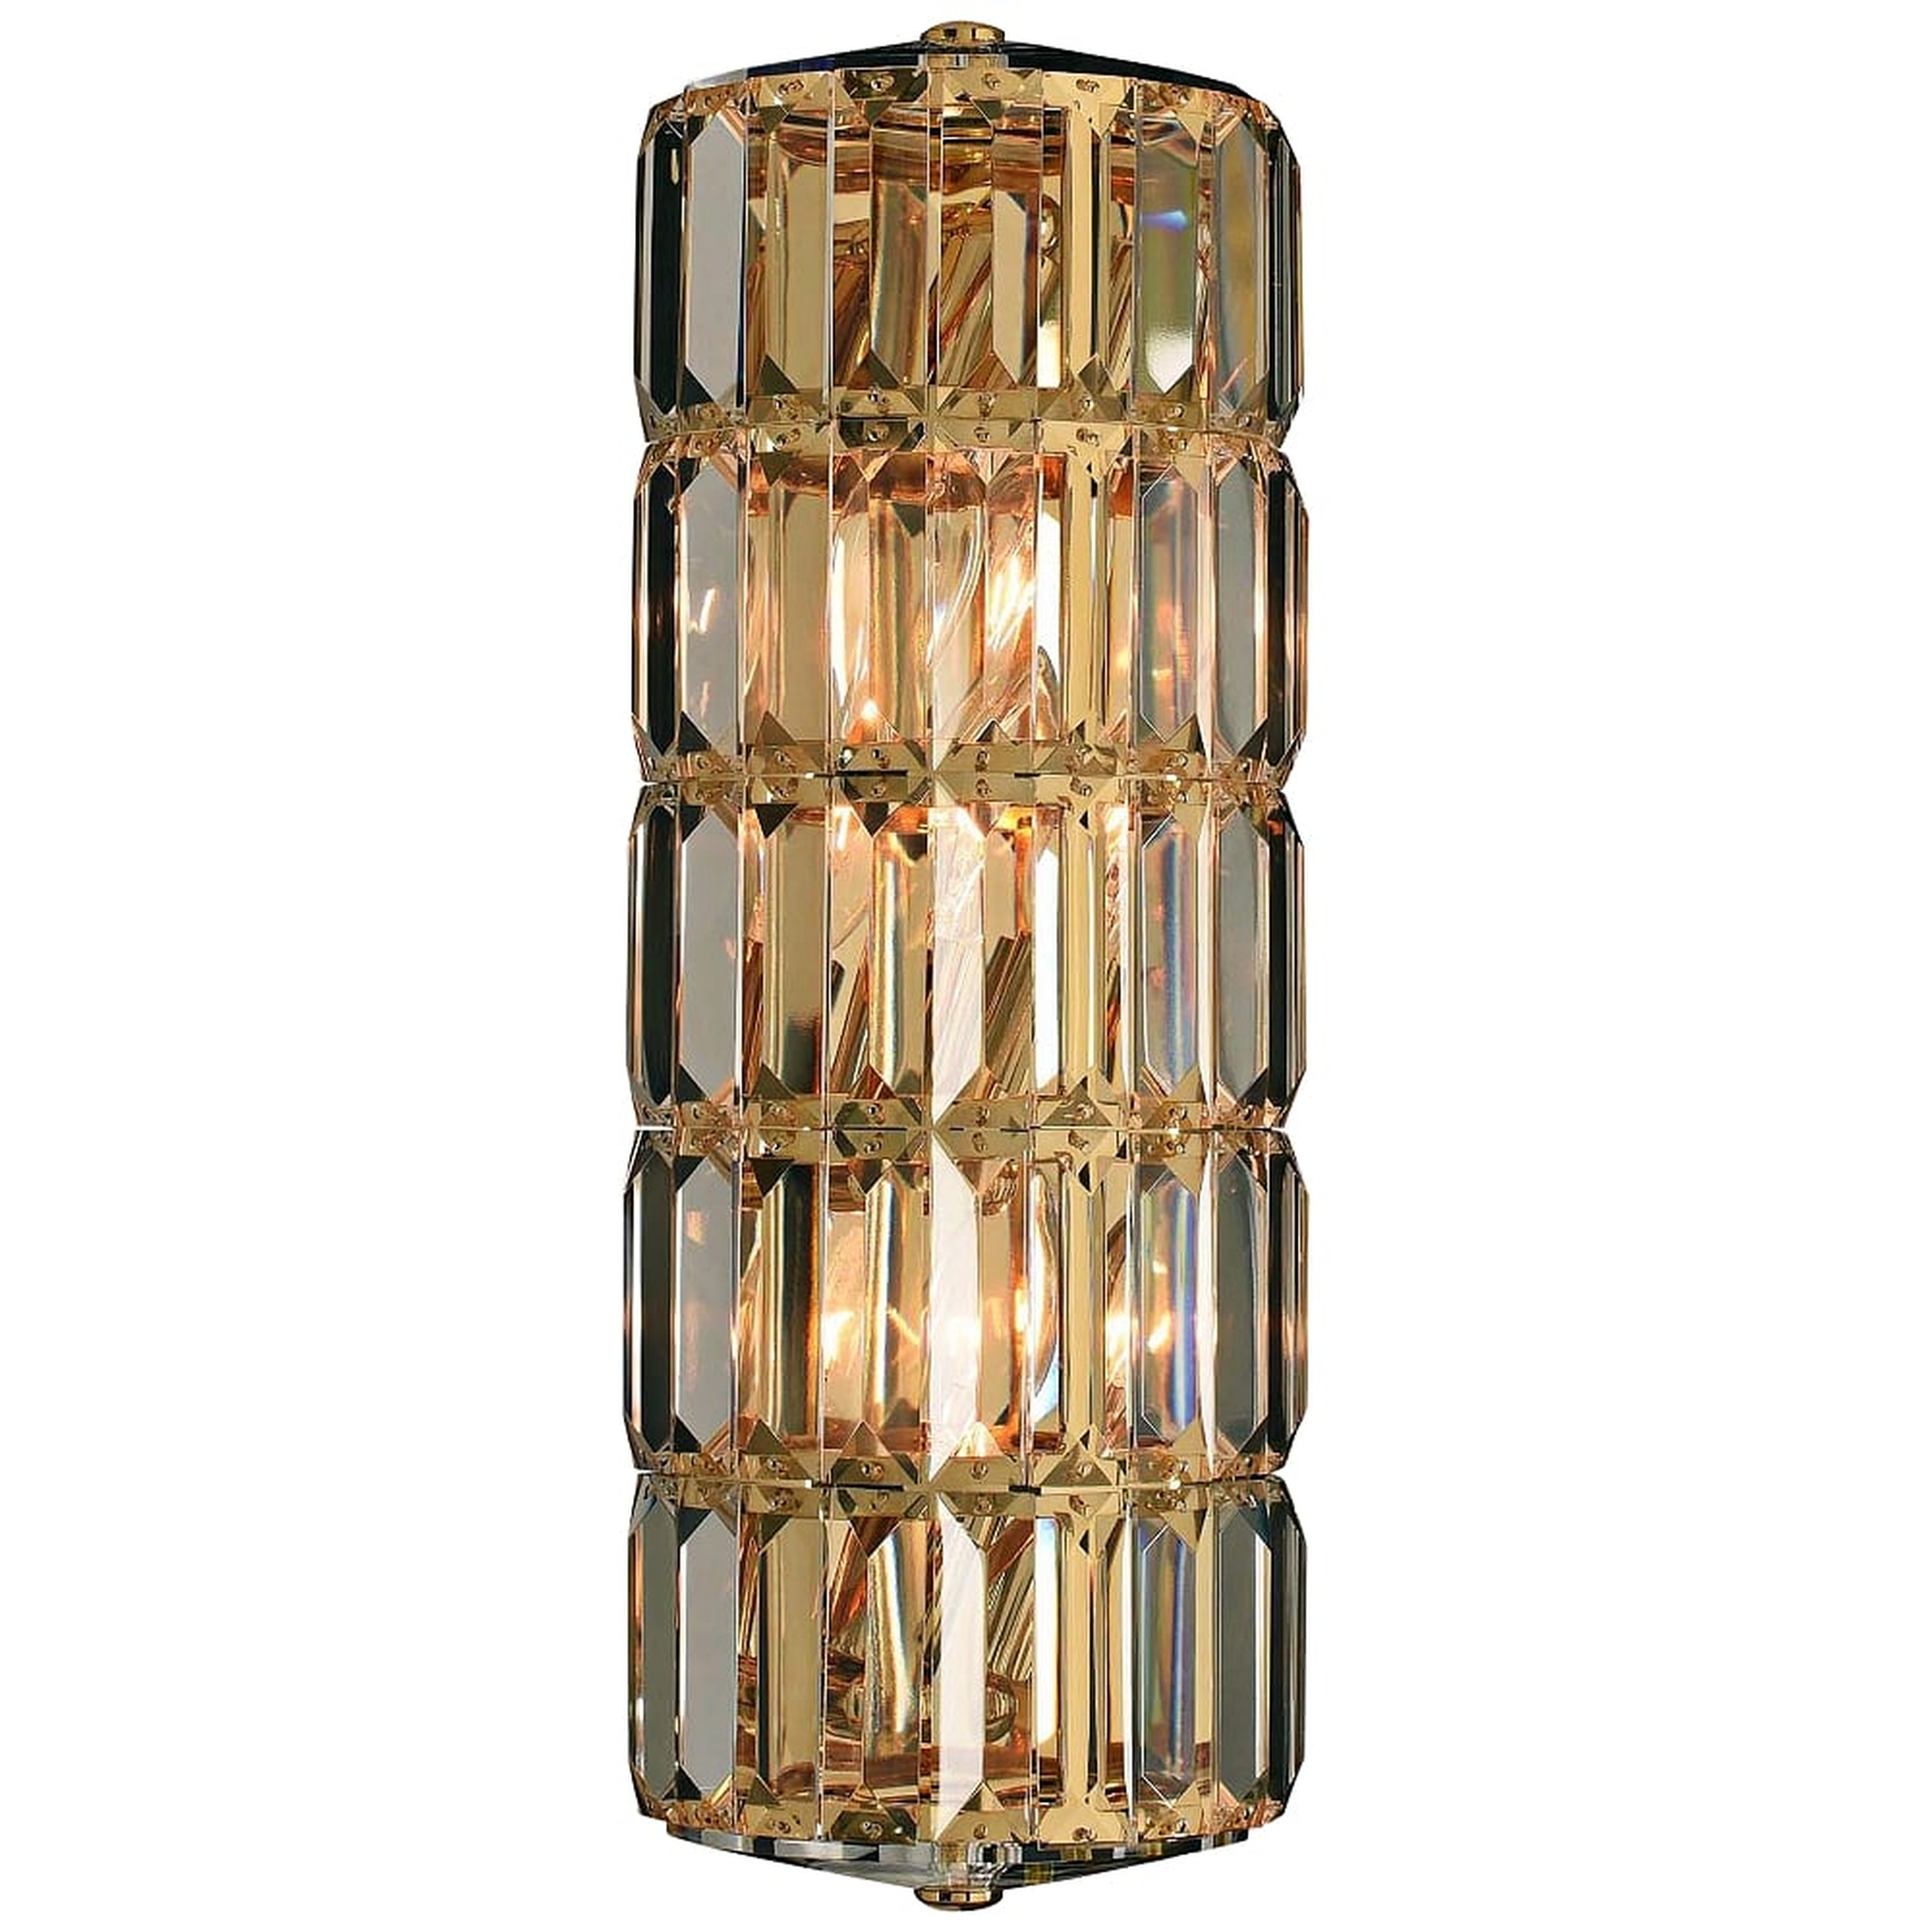 Allegri Julien 17" High Gold Wall Sconce - Style # 23A29 - Lamps Plus